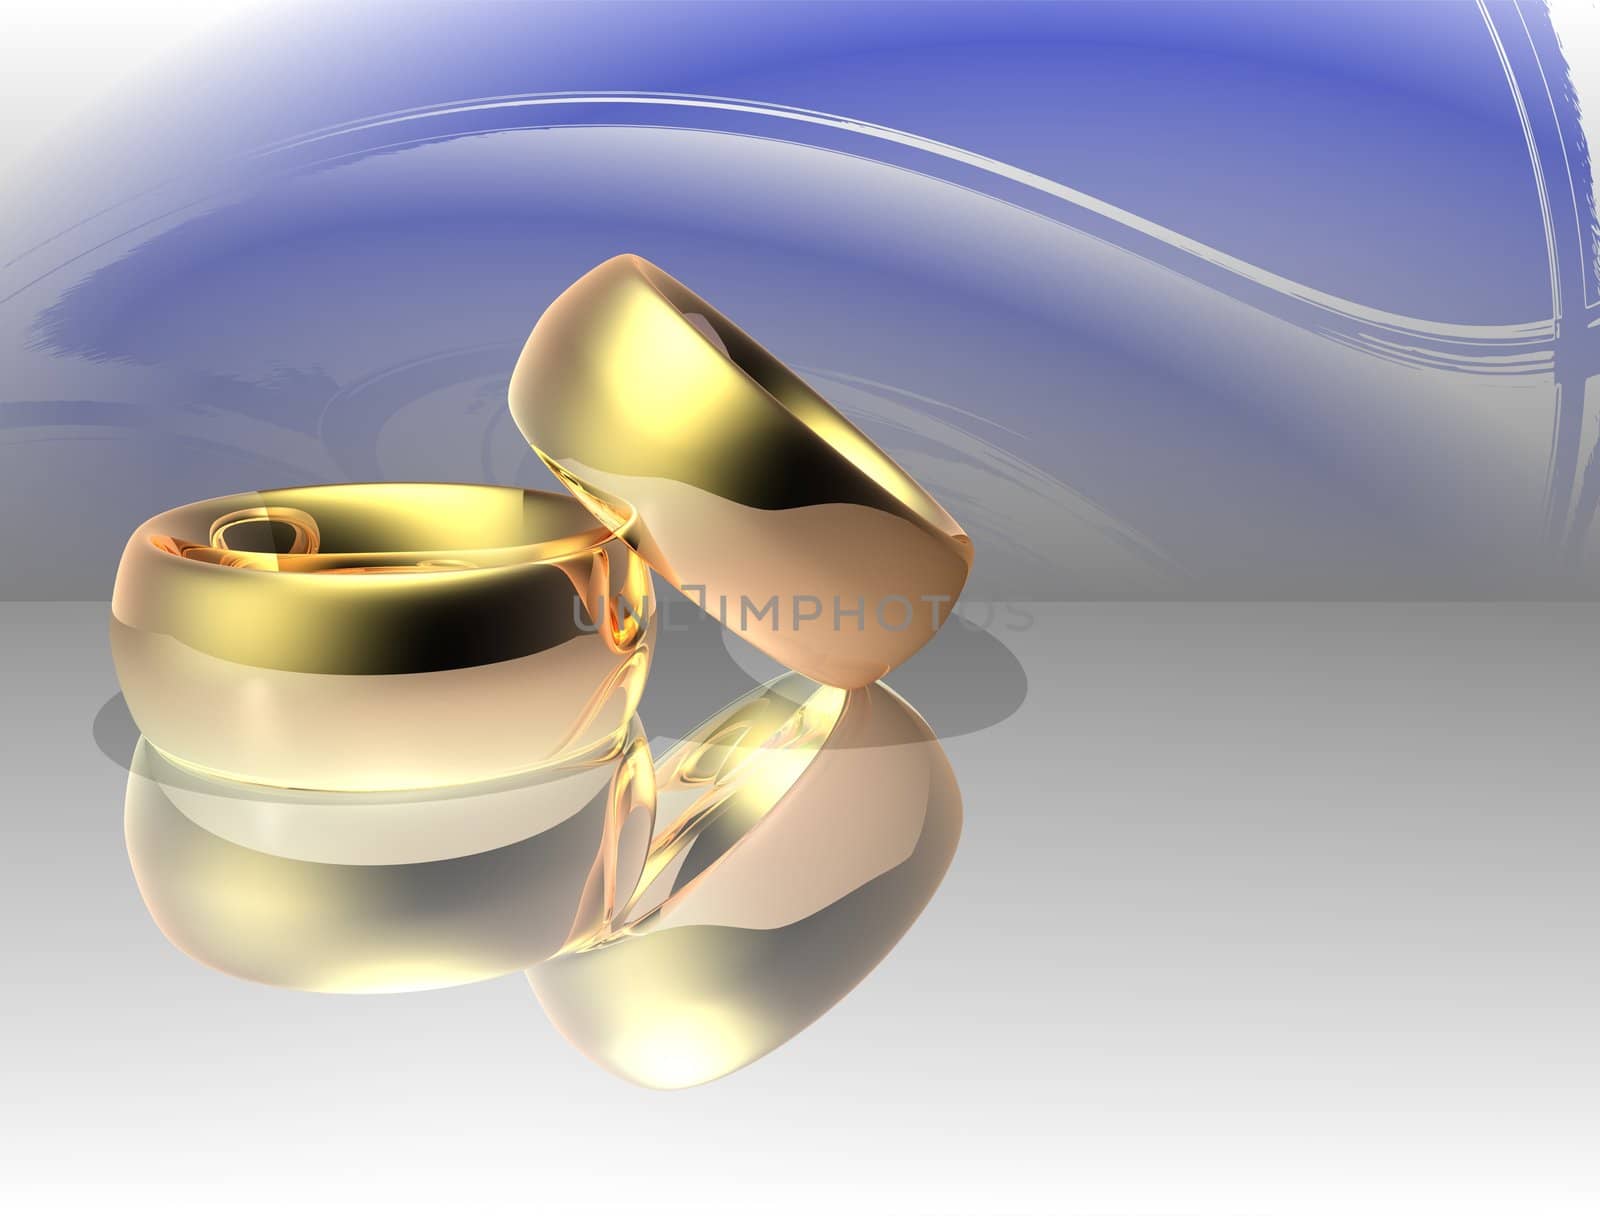 Two wedding ring on a abstract background by Jupe